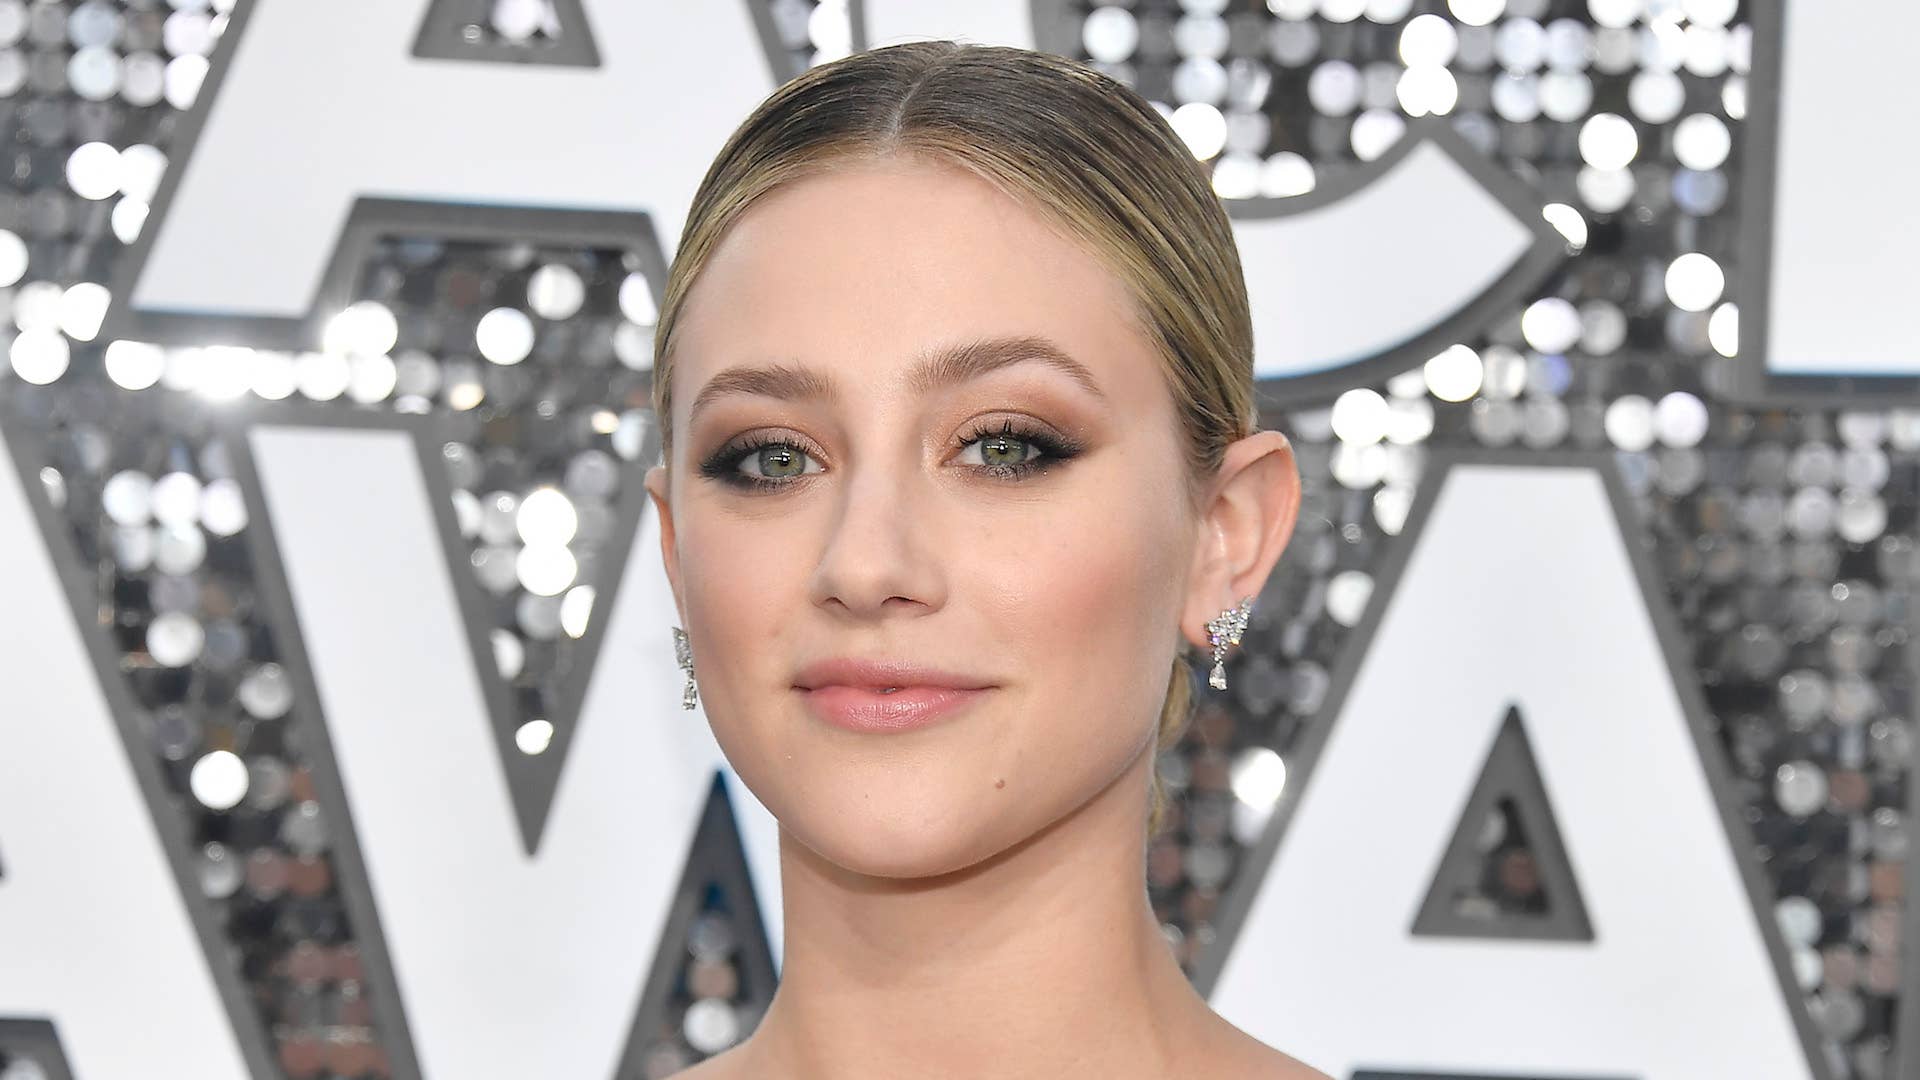 Lili Reinhart attends the 26th Annual Screen Actors Guild Awards